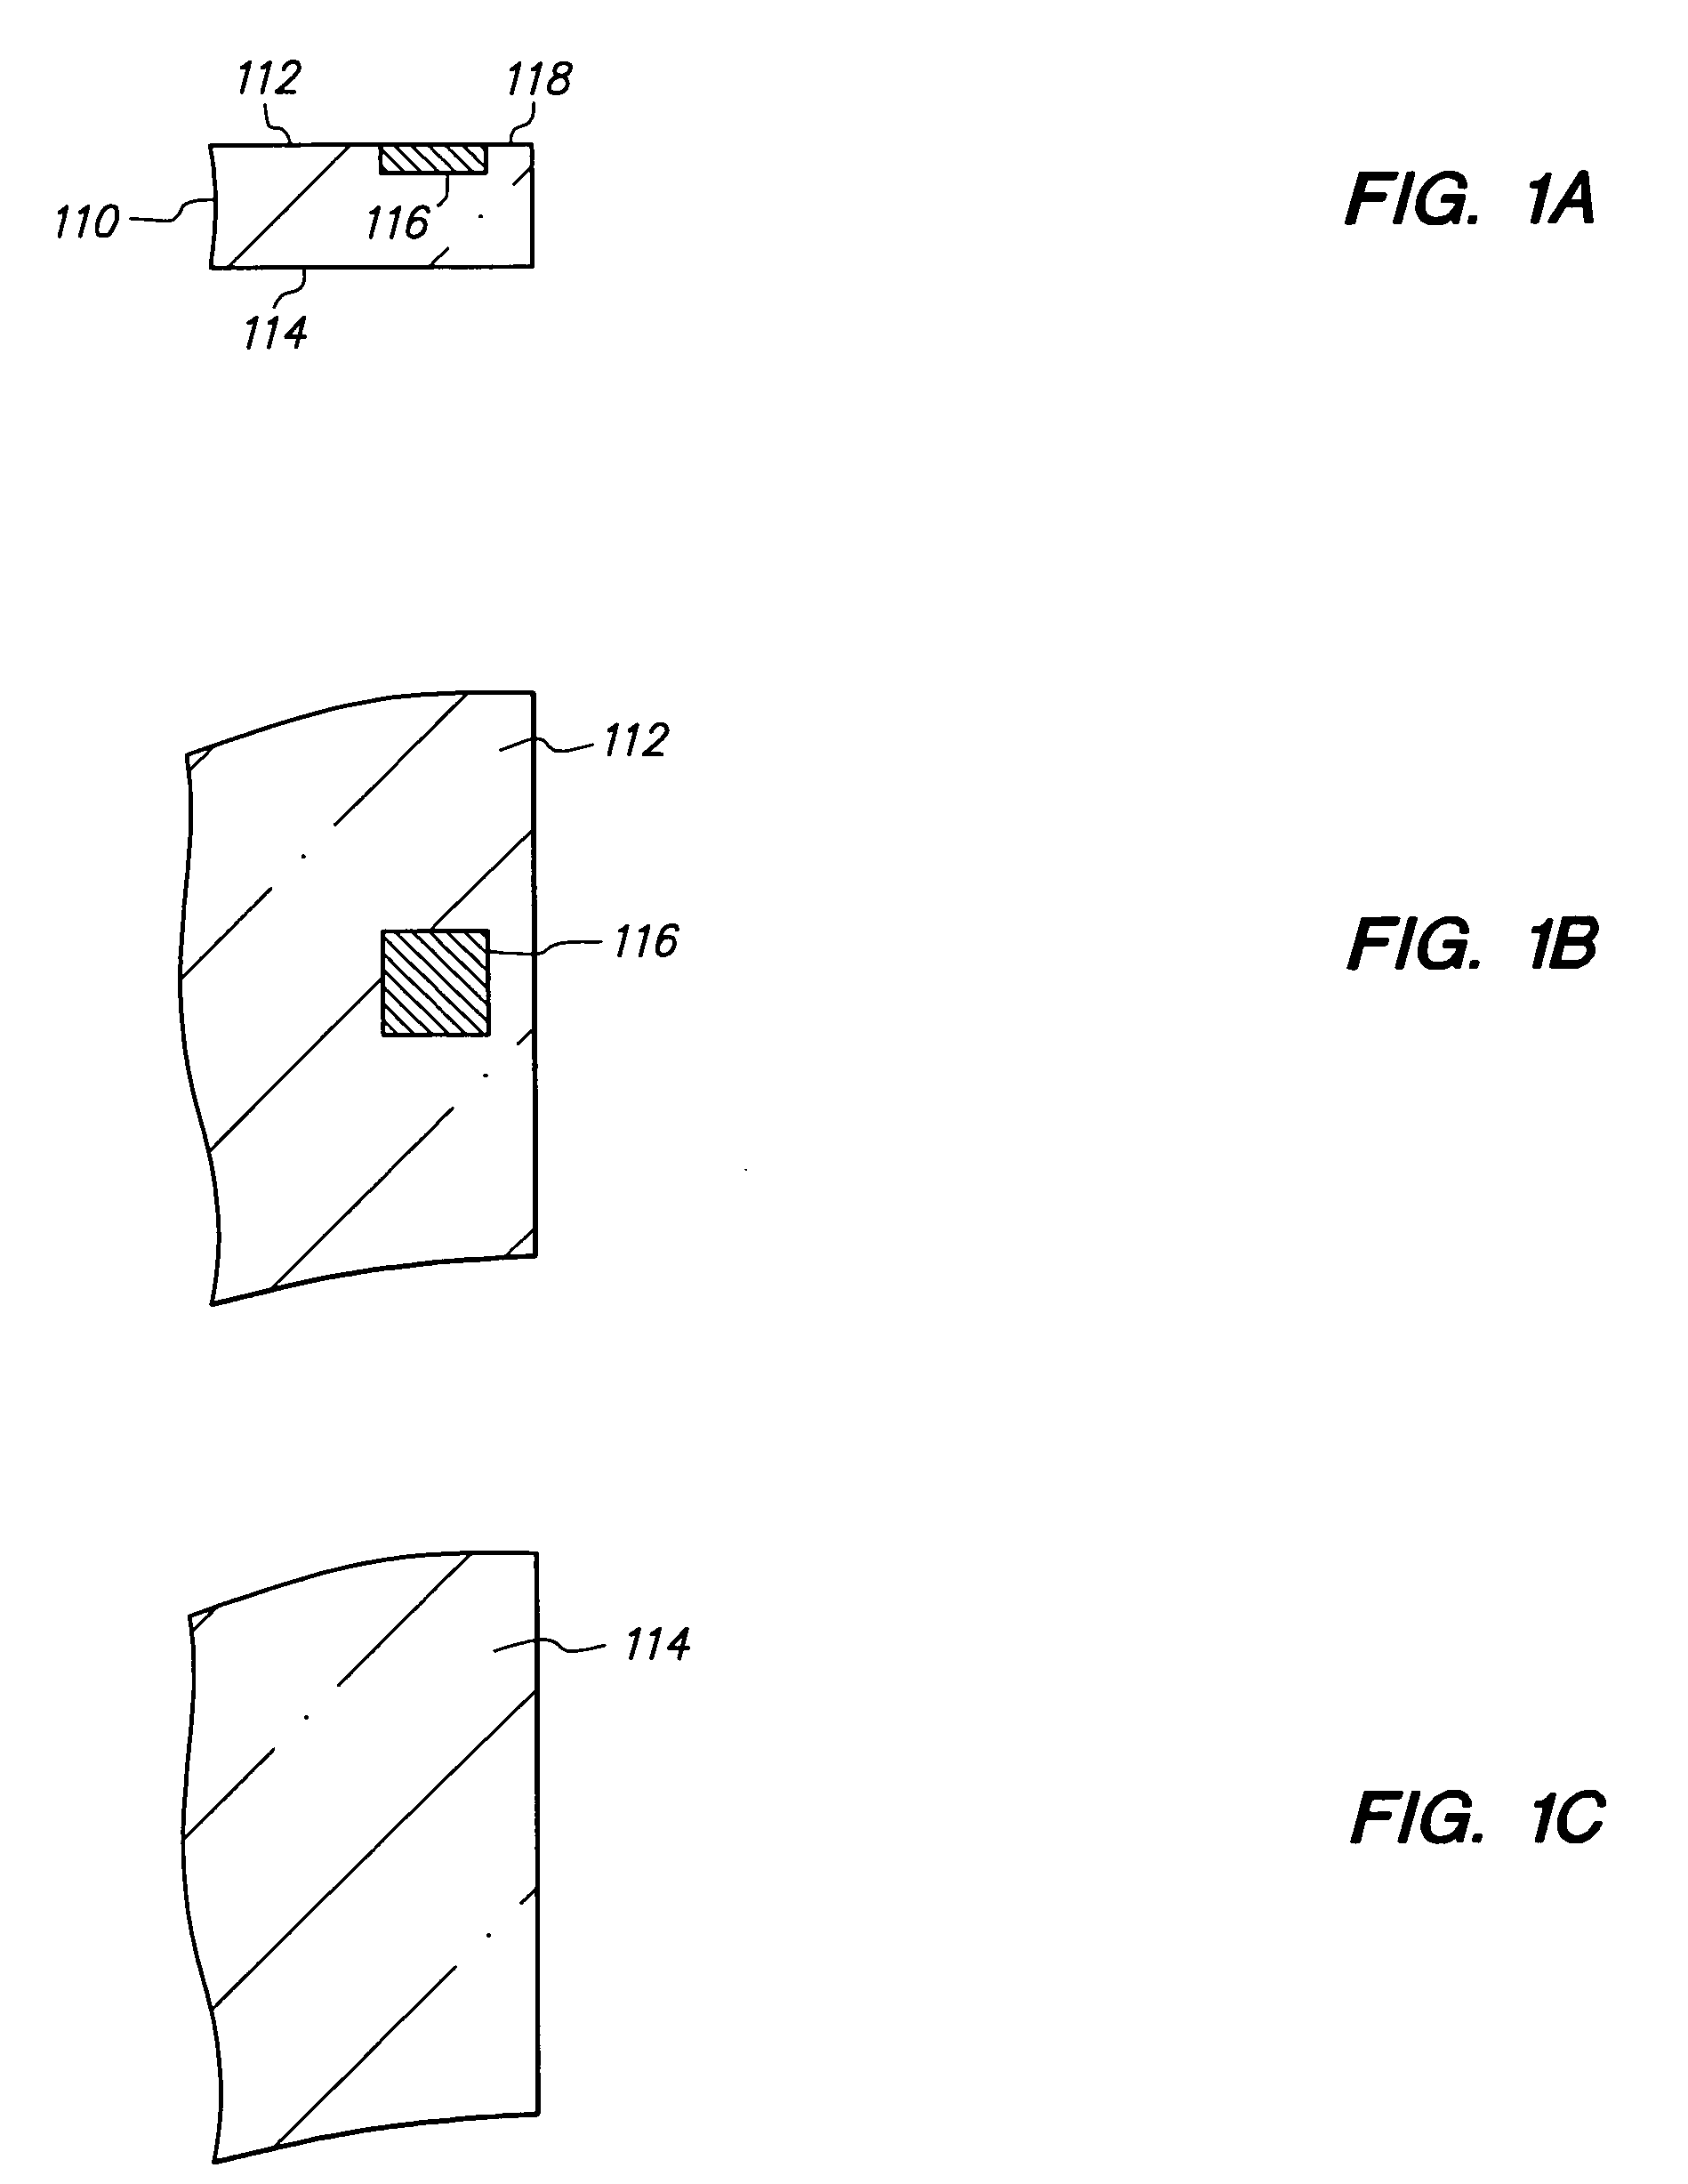 Method of making a three-dimensional stacked semiconductor package with a metal pillar and a conductive interconnect in an encapsulant aperture